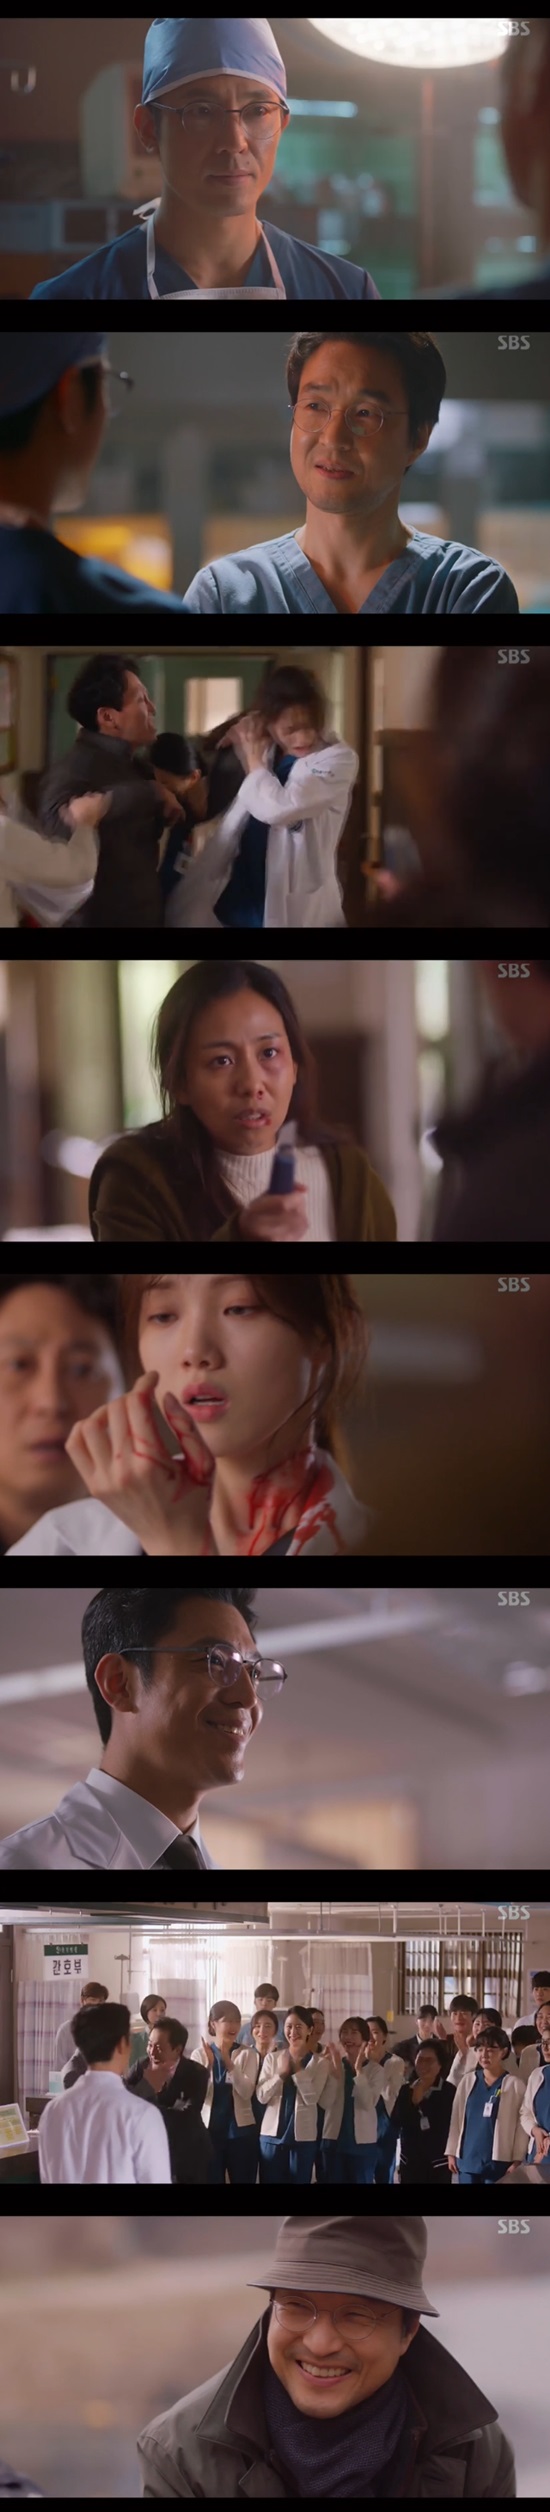 As soon as Kim Ju-Hun became the new director, he began to provoke Han Suk-kyu, and Lee Sung-kyung was in Danger.In the 6th episode of SBSs Romantic Doctor Kim Sabu 2 broadcast on January 21 (playplayplay by Kang Eun-kyung/directed by Yoo In-sik, Lee Gil-bok), Kim Ju-Hun challenged Kim Sabu (played by Han Suk-kyu).When the patients came to the hospital, Kim asked Park Min-guk for help, and Park Min-guk reluctantly helped the surgery and said, What if I did not come in?So how many patients have died? Kim said, So there are a lot more people who have saved them.Kim said, So this is not a place where you can operate so elegantly.Park Min-guk said, I will have to correct the system that goes back to the old-fashioned way without proper manuals when I see the situation today.Im sure youll have to control your madness, he said.Kim Sa-bu, everyone here calls me that way, Kim said.After Do Yun-wan (Choi Jin-ho) asked, Did you find How to push Buyongju? Park Min-guk said, How about it? There are not many Hows to beat him at Doldam Hospital.Instead, it is possible to make him feel humbled to believe that he is right. The first How, which Park Min-guk, who became the new director, was the wage increase. I felt a lot of Savoie when I saw the poor environment.Improve your treatment.As head of the hospital, I will continue to improve your treatment and recover your deficit at Doldam Hospital, he said. I will continue to work to improve your treatment and recover your deficit at Doldam Hospital.When a man was caught cheering by medical staff on Park Min-guks wage increase, Kim Sa-bu met with the former head of the power plant, Yeo Un-yeong (Kim Hong-pa), and said, My head is a good Savoie.When Yeo Un-yeong asked, Yes, it seems like there are some prudent and principle. Maybe its a trickier opponent than Do Yun-wan. Is that okay? Kim said, What are you going to do?As the full-scale confrontation between Kim Sa-bu and Park Min-guk began, Cha Eun-jae (Lee Sung-kyung), who was at the end of the broadcast, argued with her husband after learning that a Korean husband from multicultural families assaulted a foreign wife.The husband fought to tell Cha to not care about other peoples housework, and his wife approached him with a knife. Cha Eun-jae was stabbed to death by a knife, saying, No.Yoo Gyeong-sang